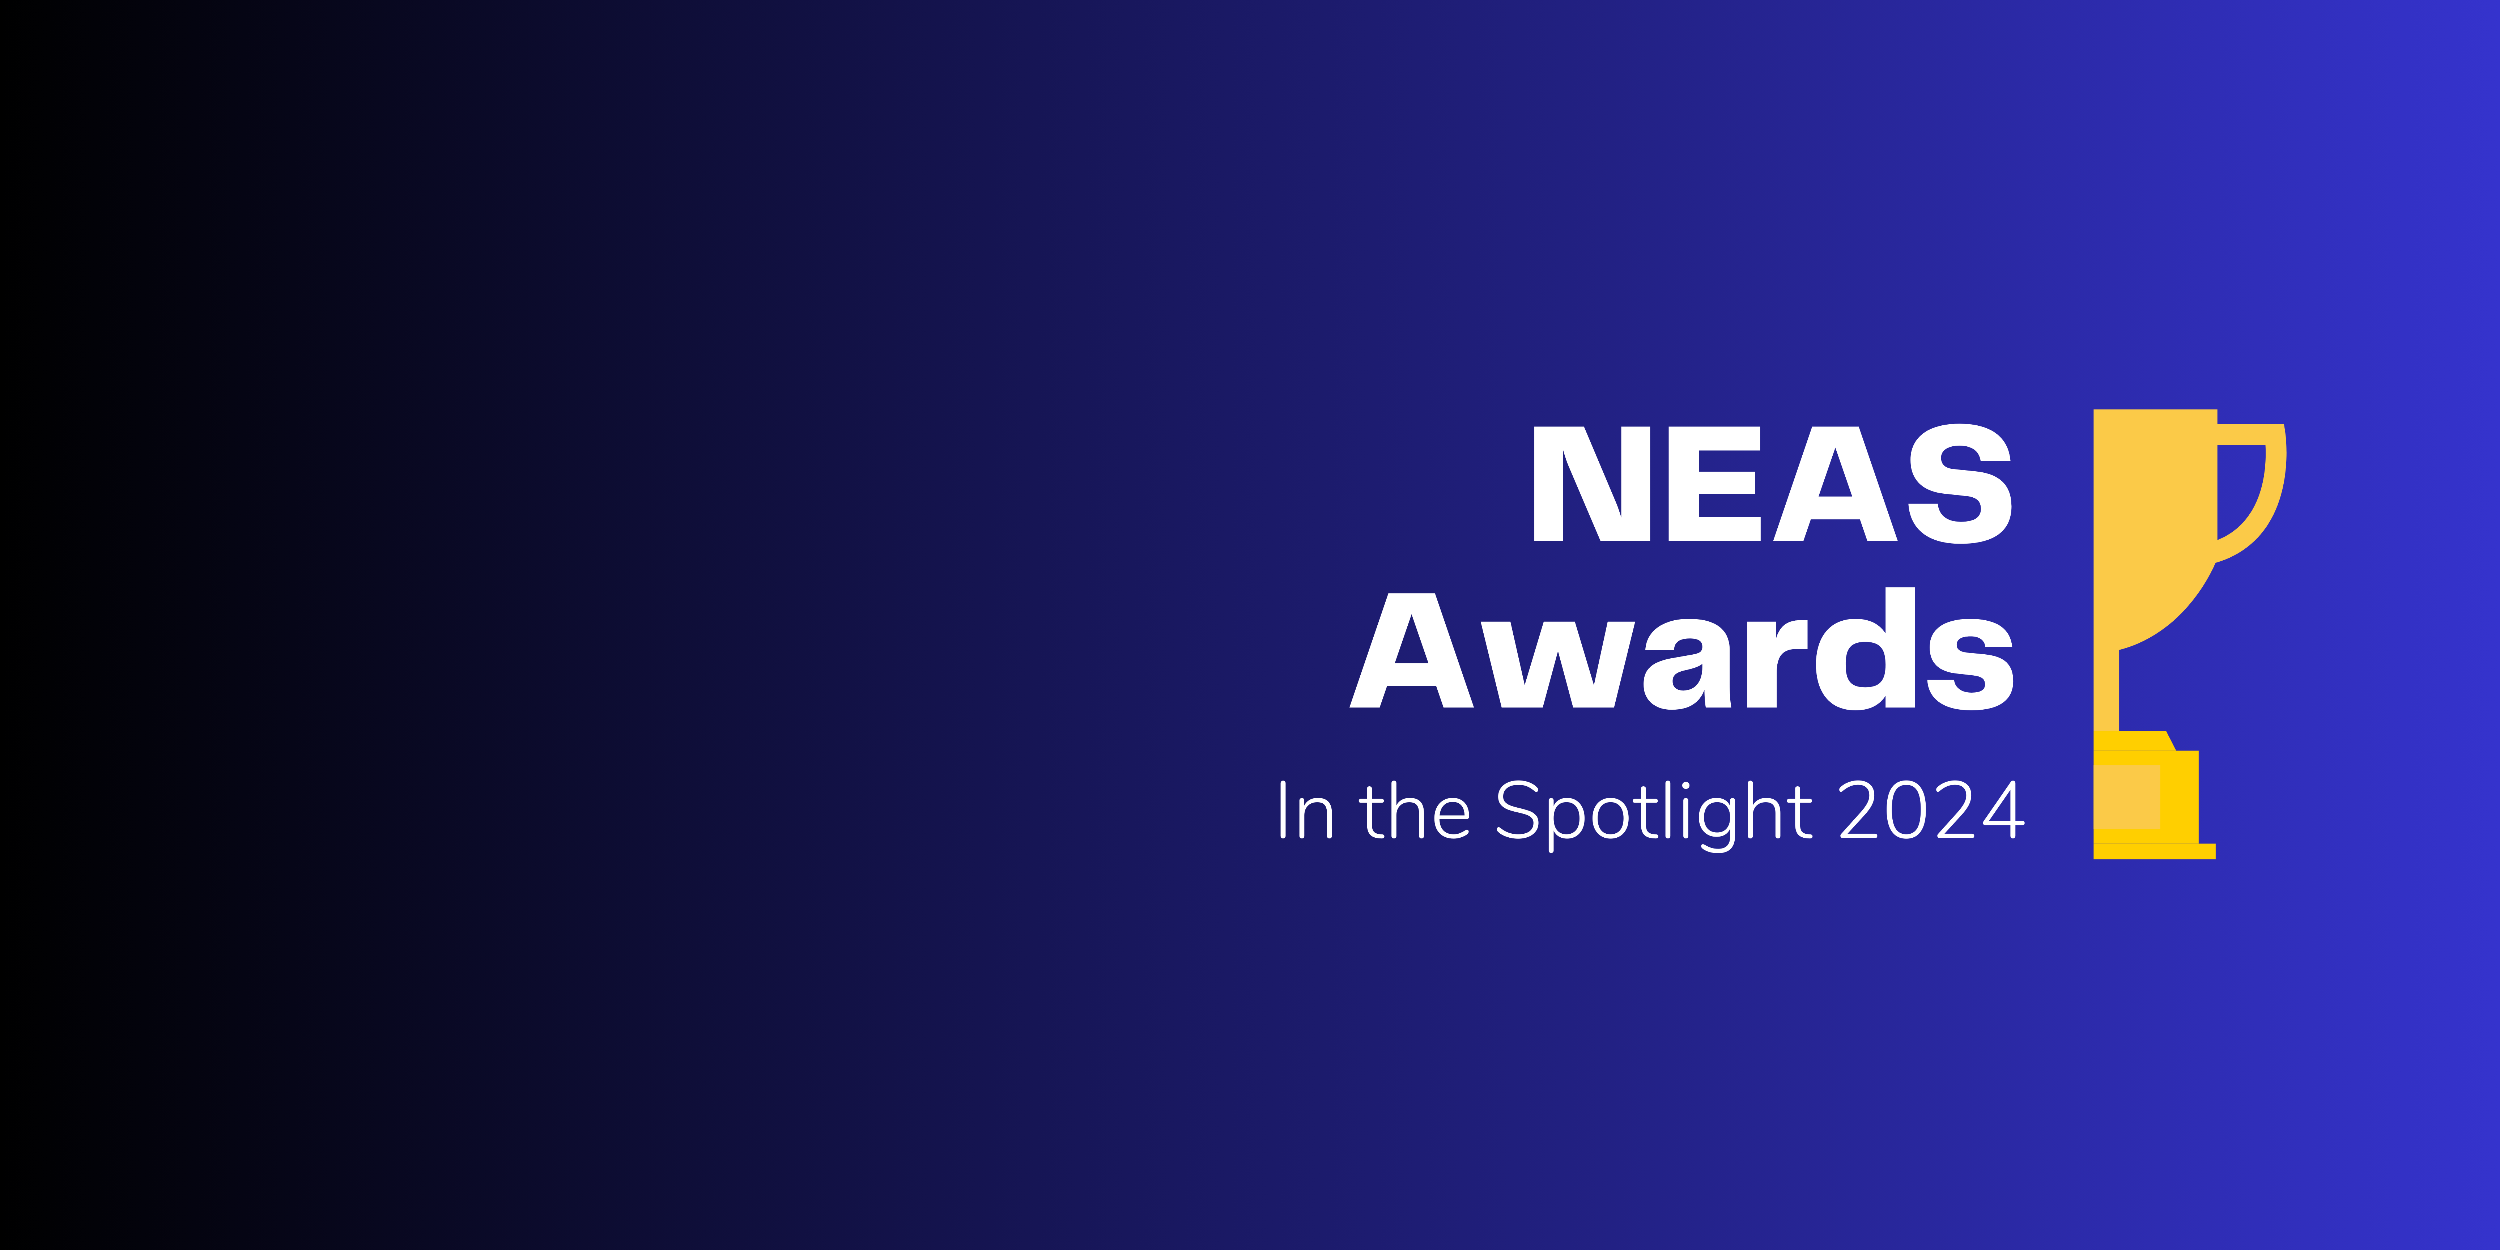 NEAS Awards 2024 banners.png